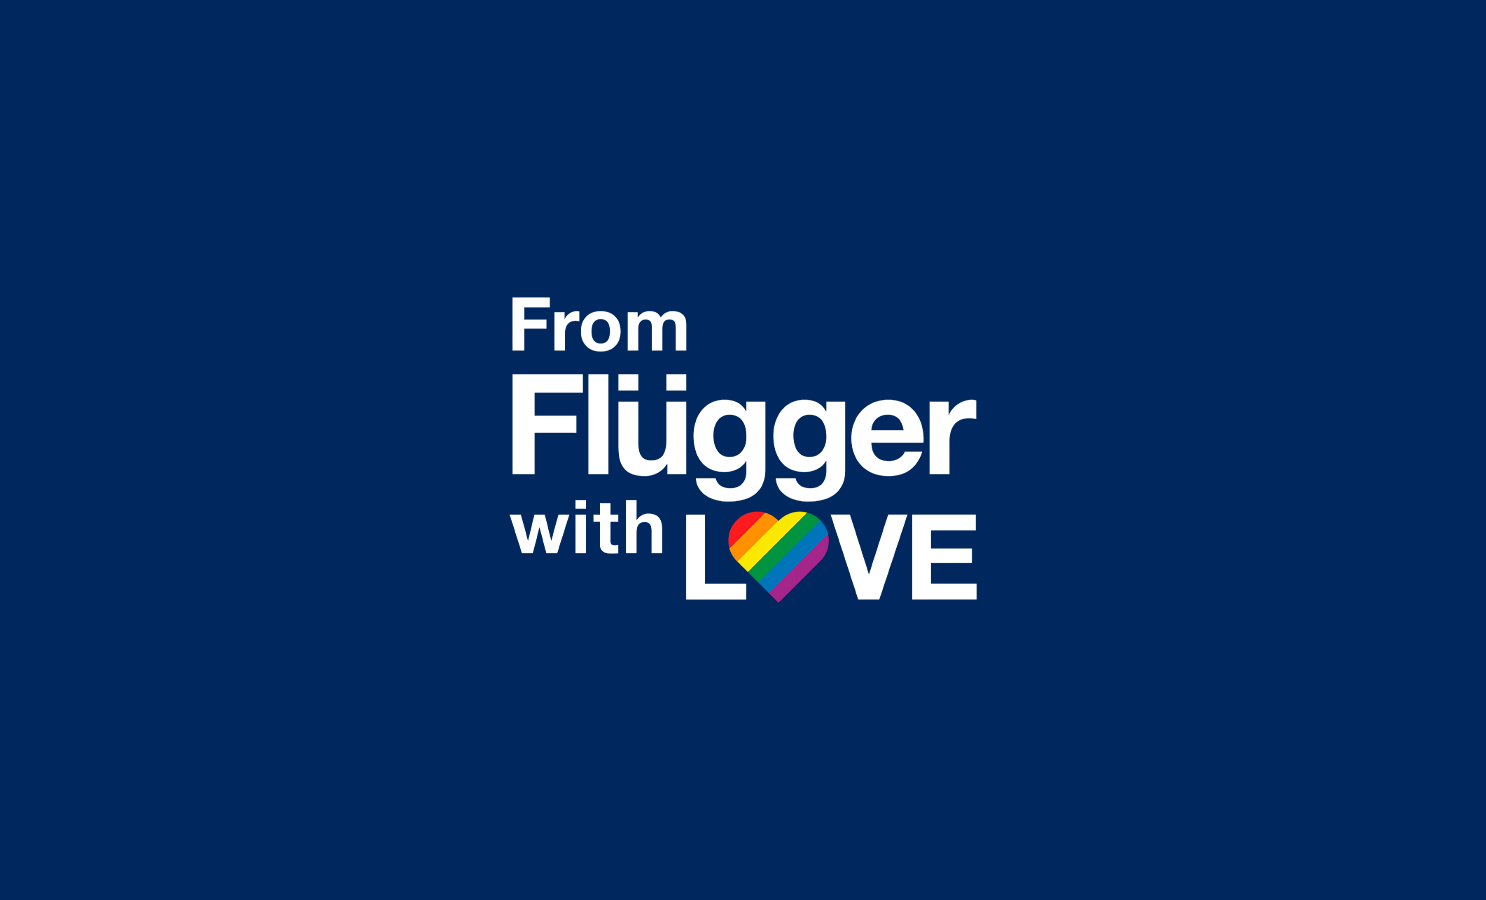 New Partnership with Flügger Starts with a Little Love…